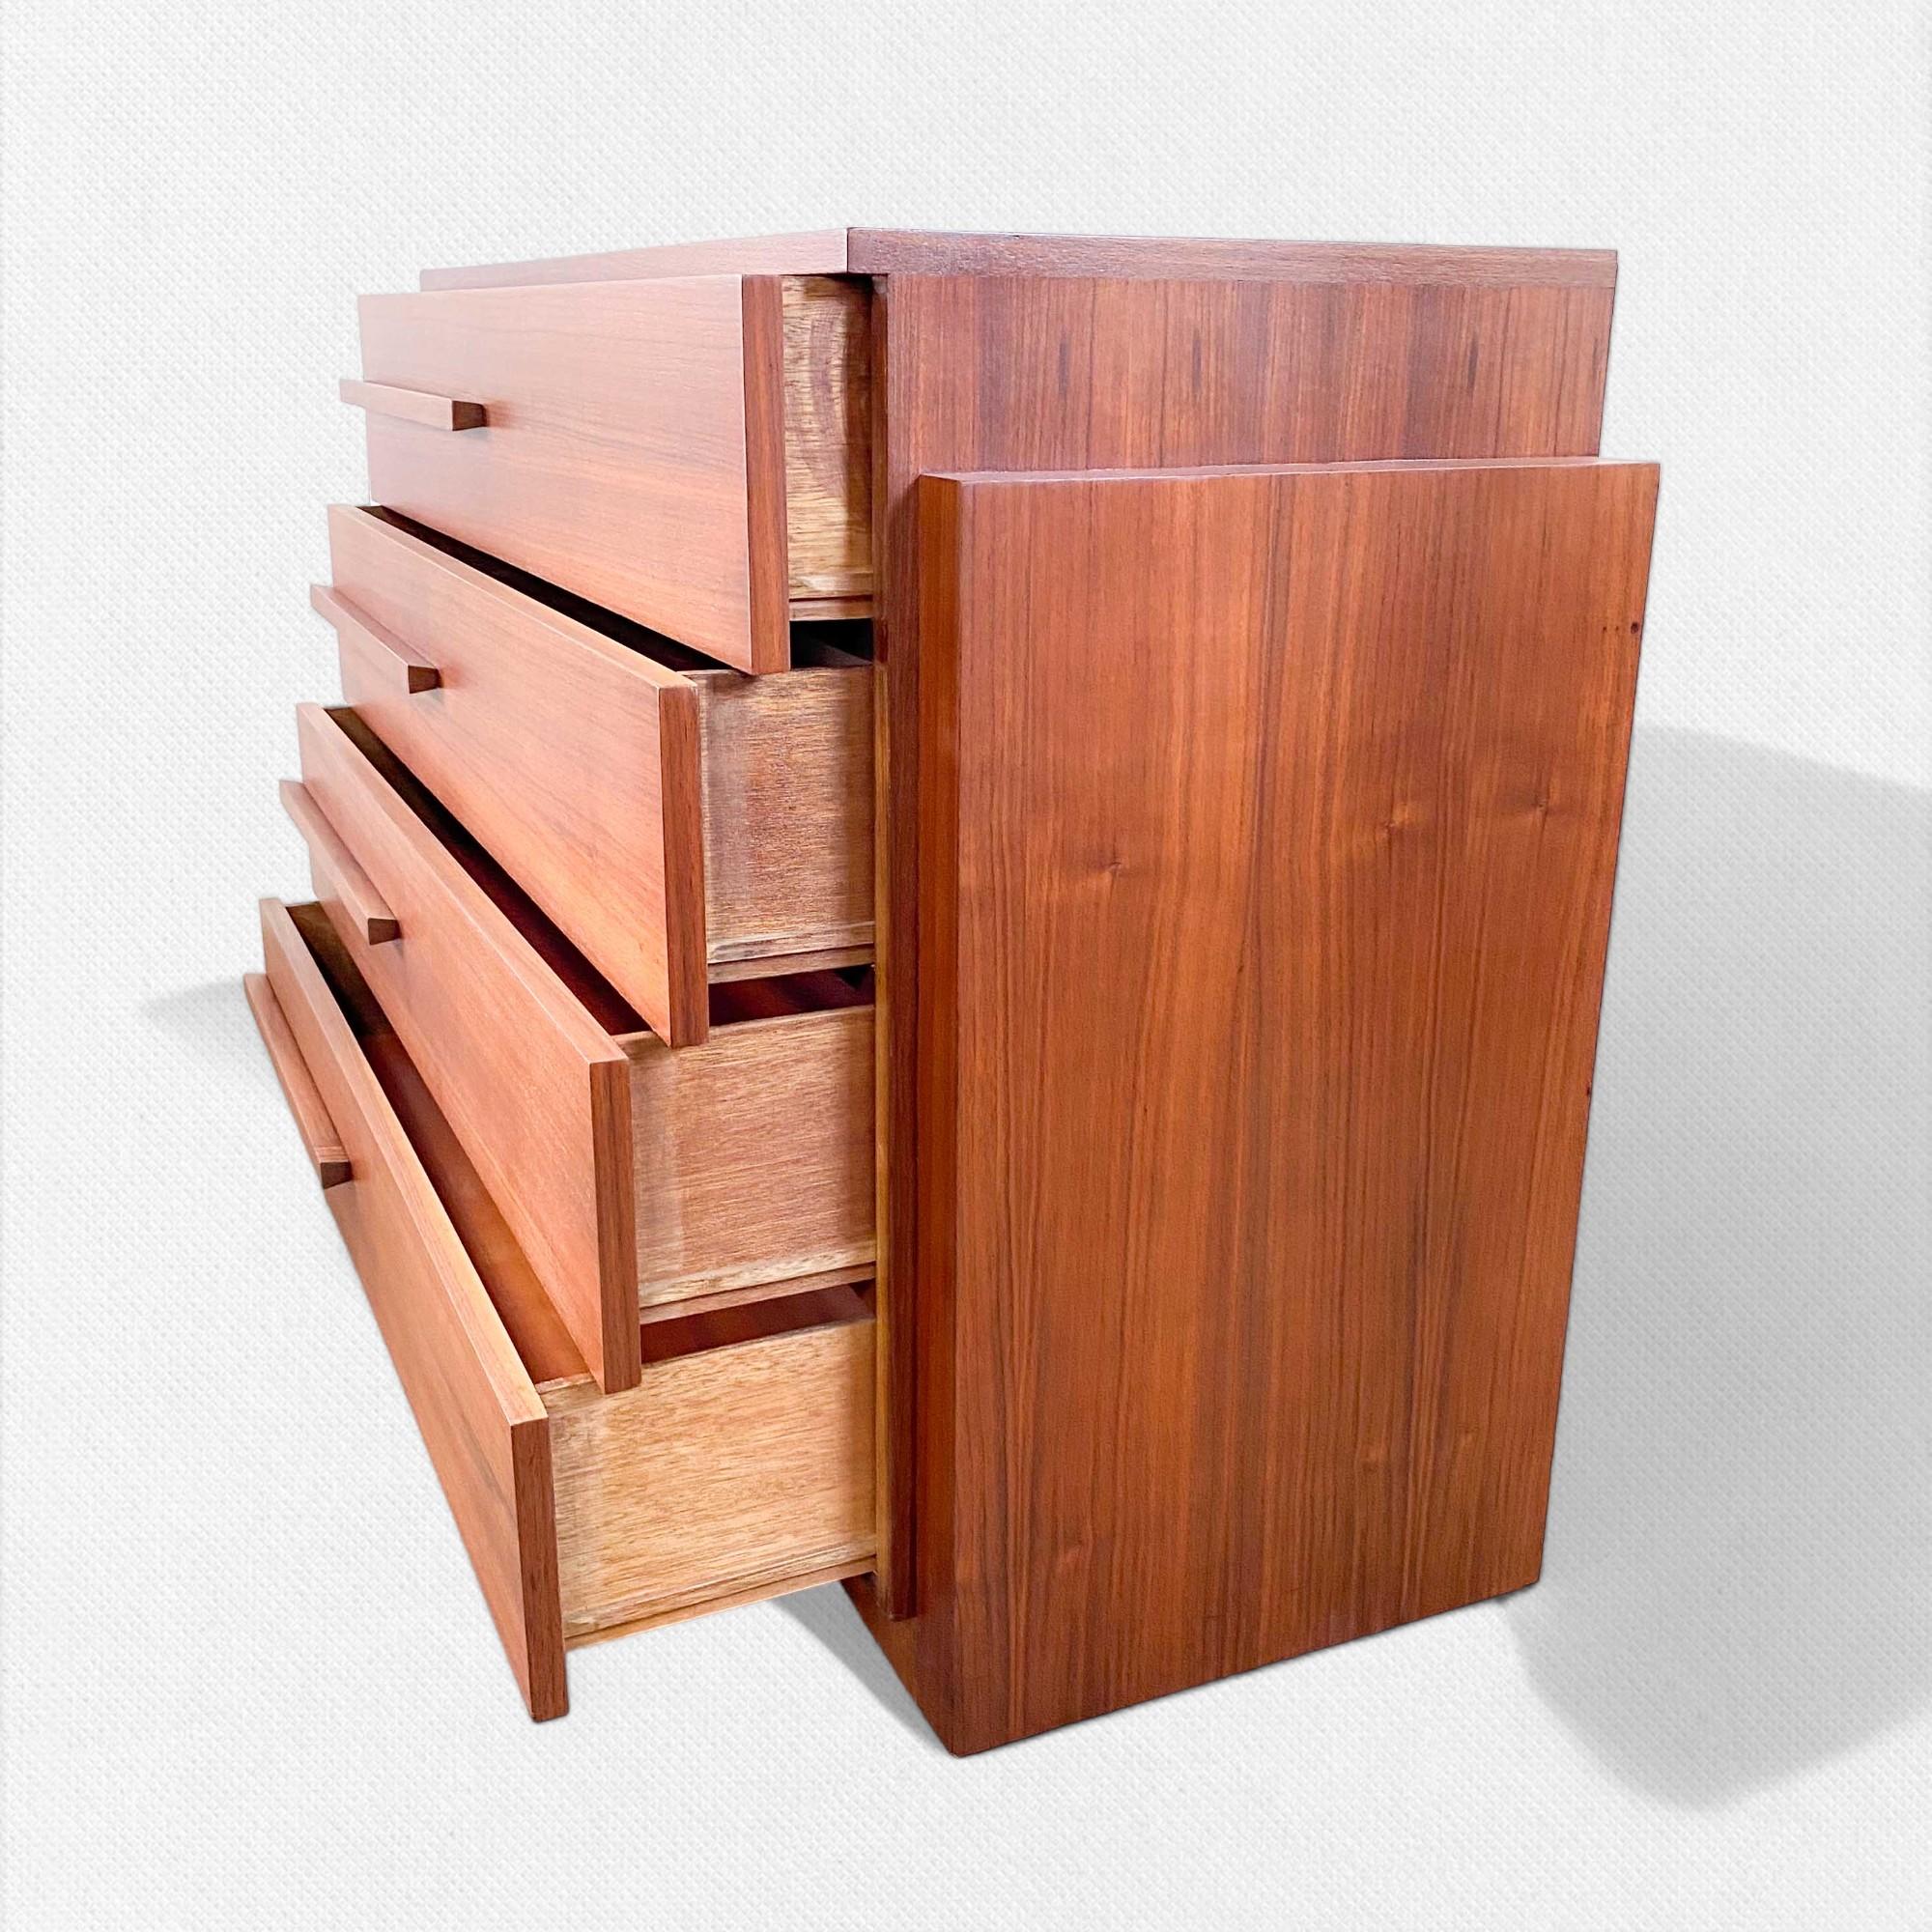 American Art Deco Streamline Mahogany Dresser by Modernage, N.Y., 1930s In Good Condition For Sale In Camden, ME